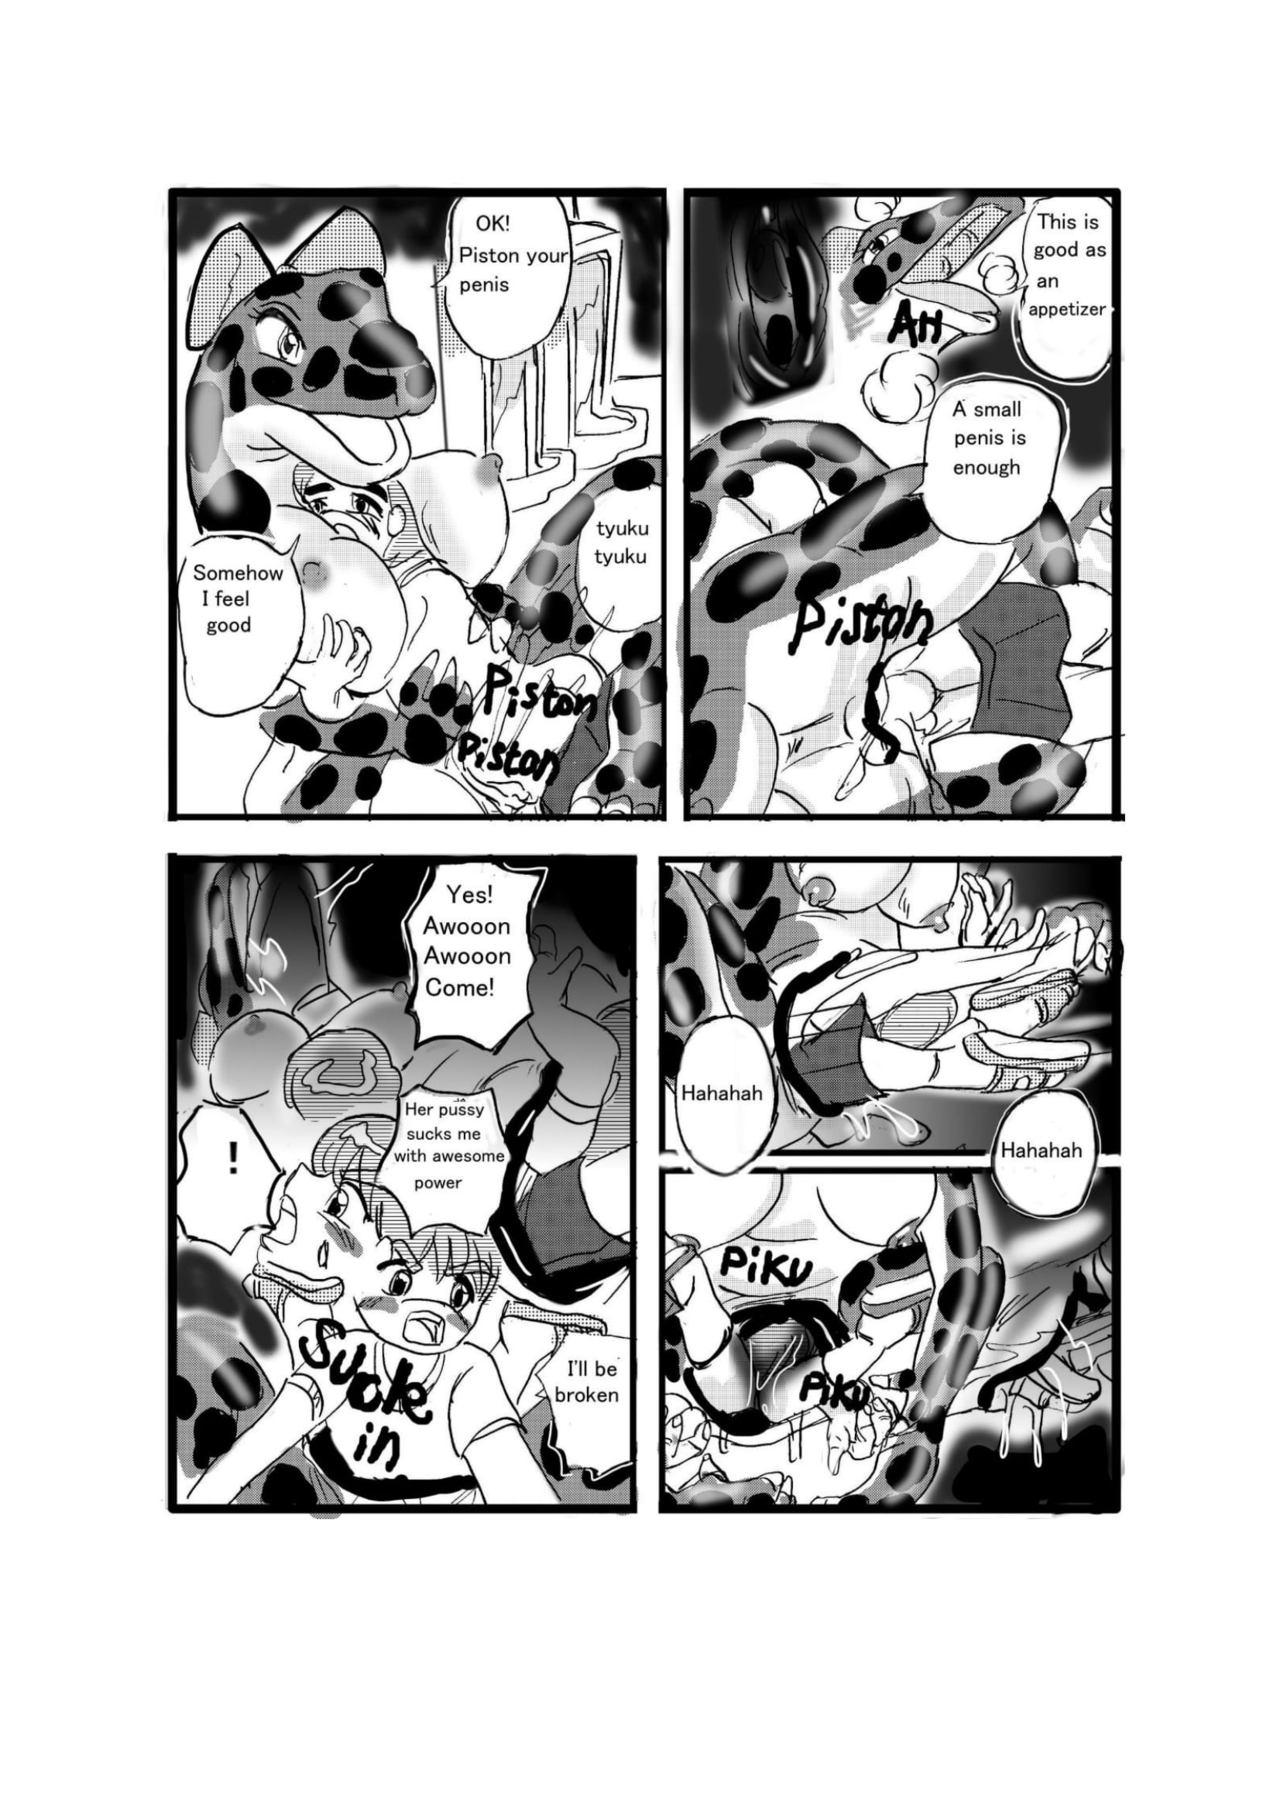 Ass Fetish Swallowed Whole vol.2 Waniko + What's Digestion? - Original Lips - Page 5